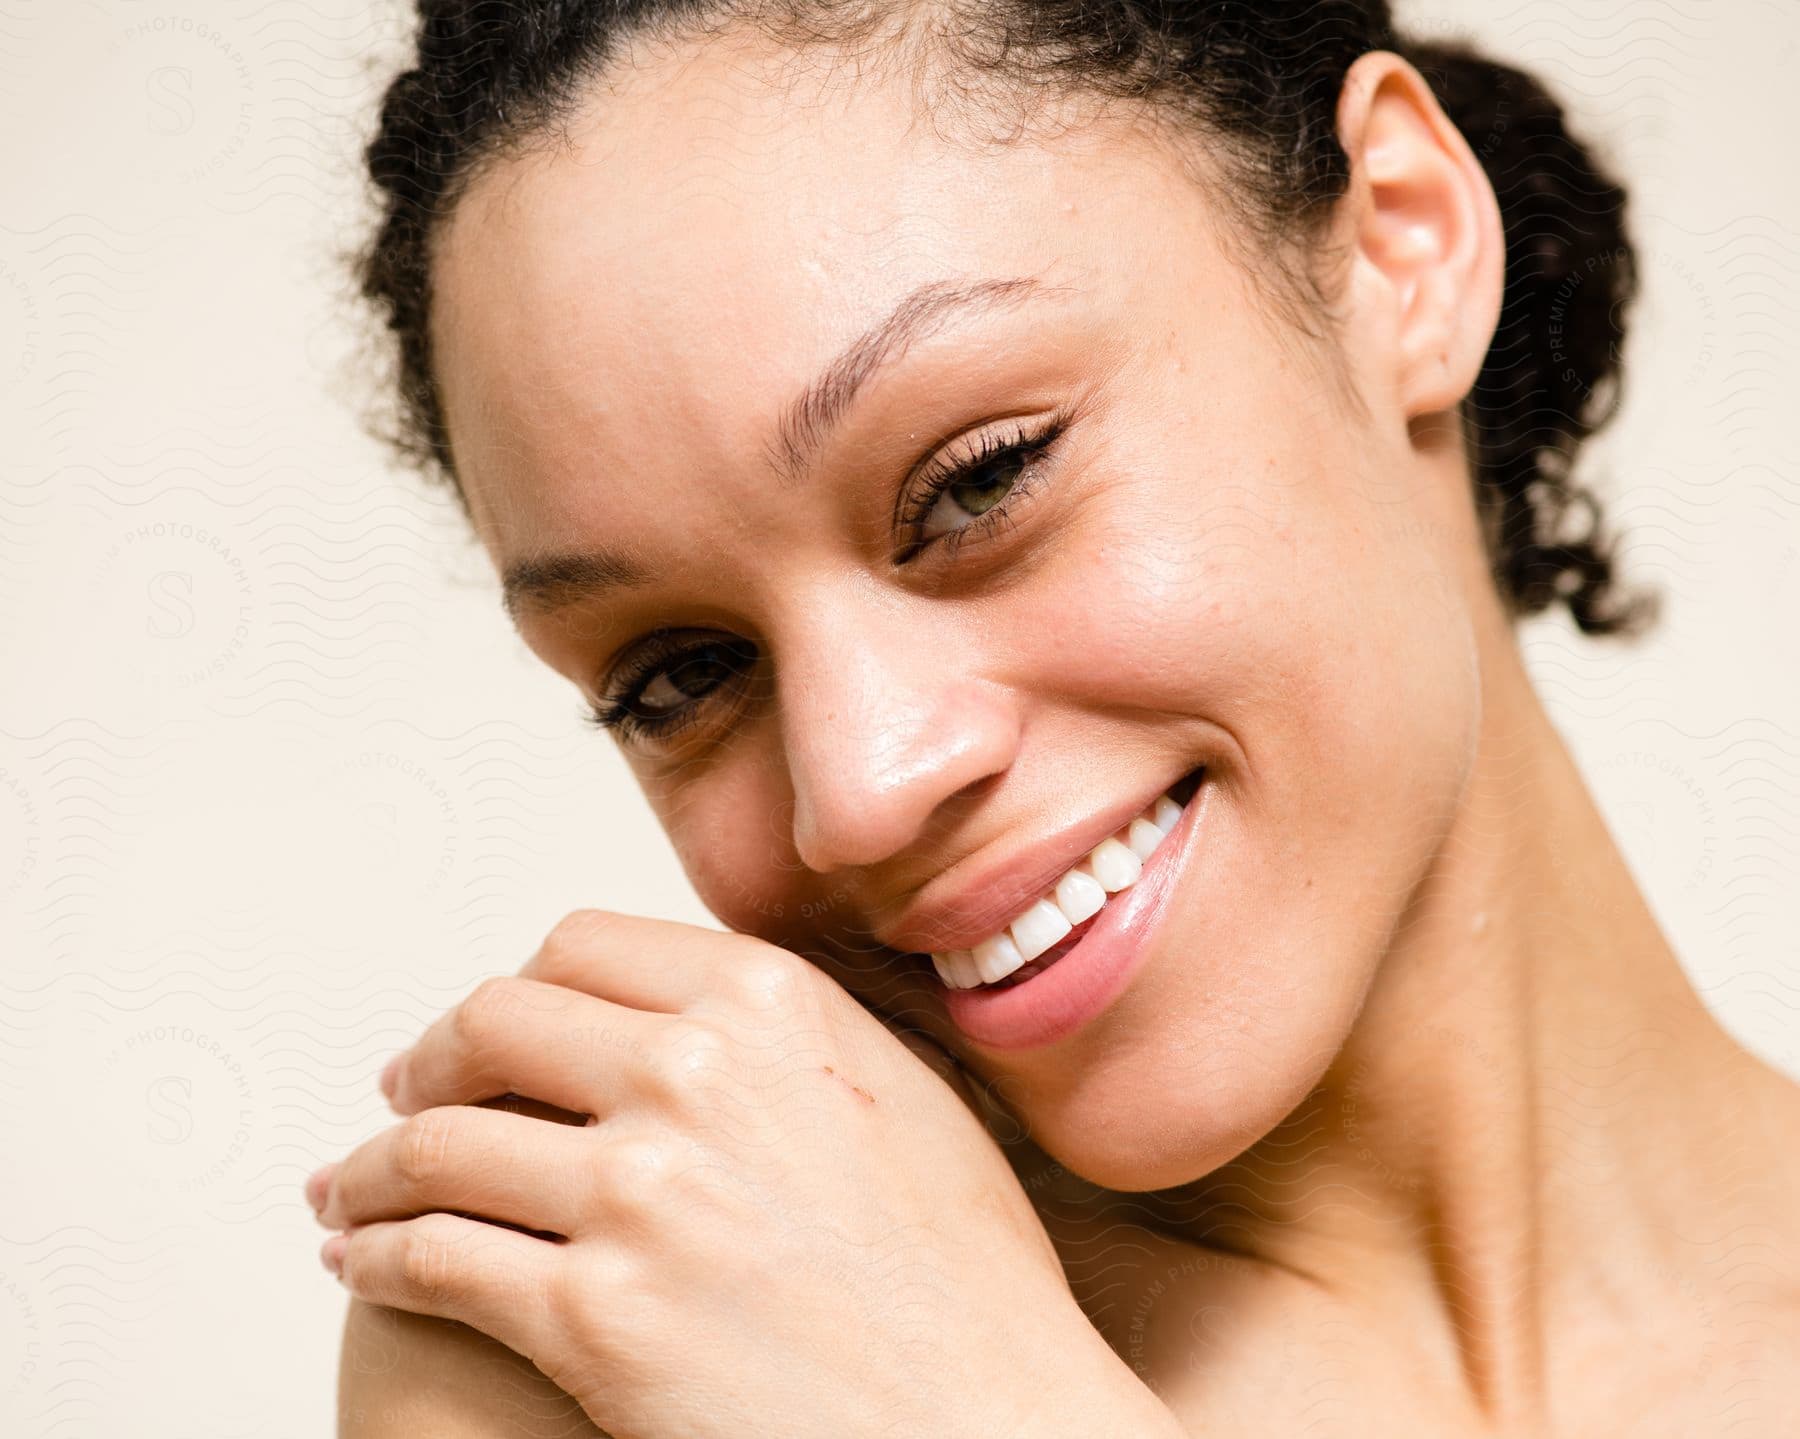 A woman smiling while tilting her head and holding her shoulder